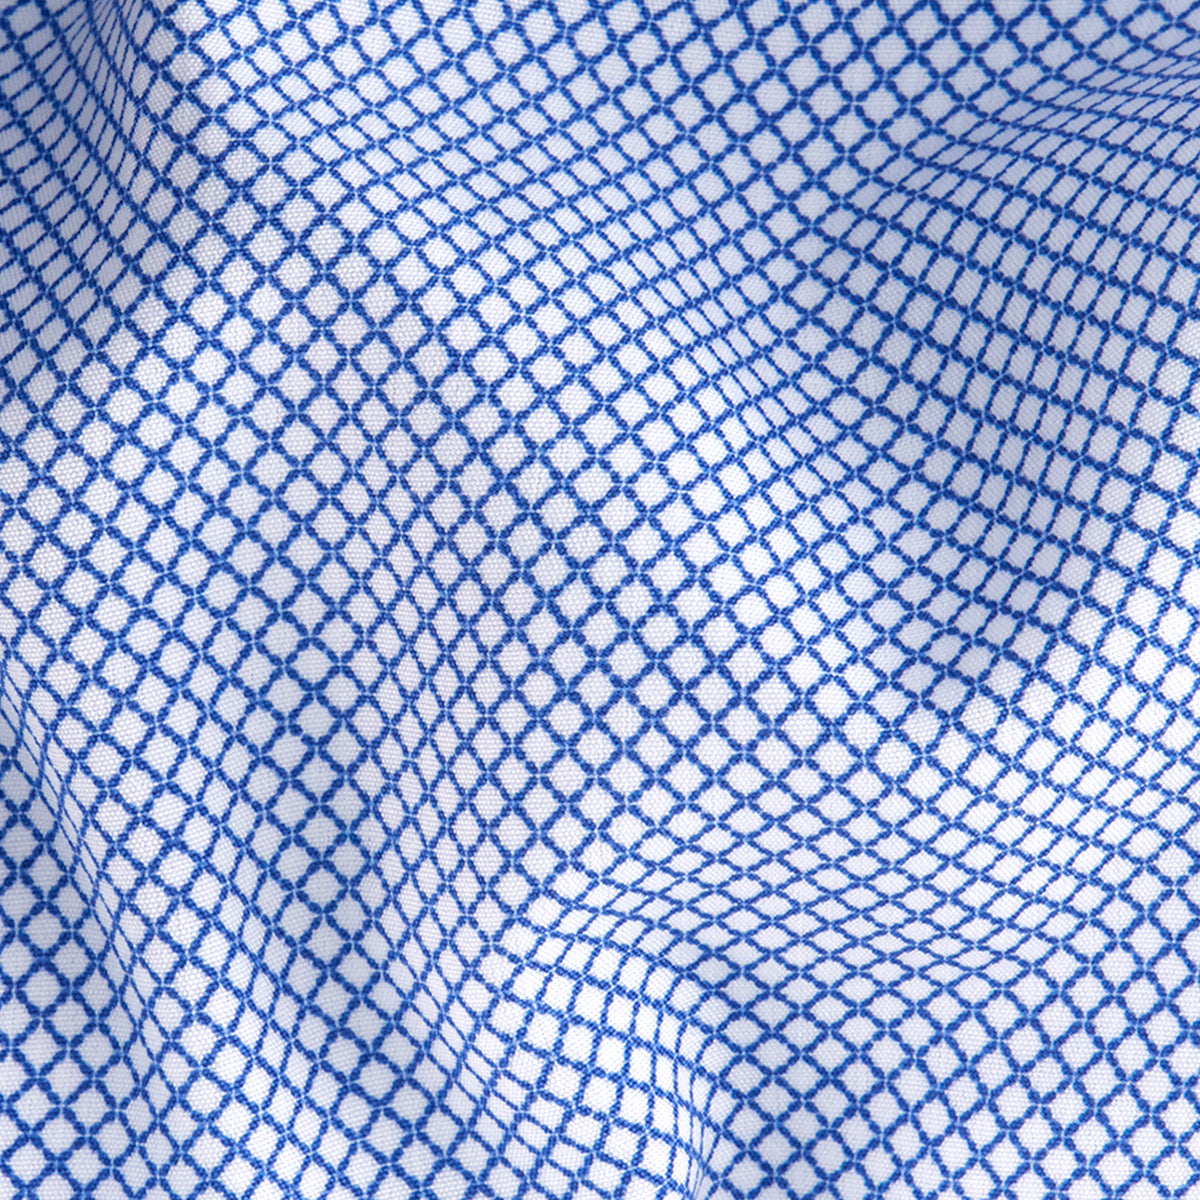 Material of Long Sleeve 4-Way Dress Shirt with Diamond Print in Blue